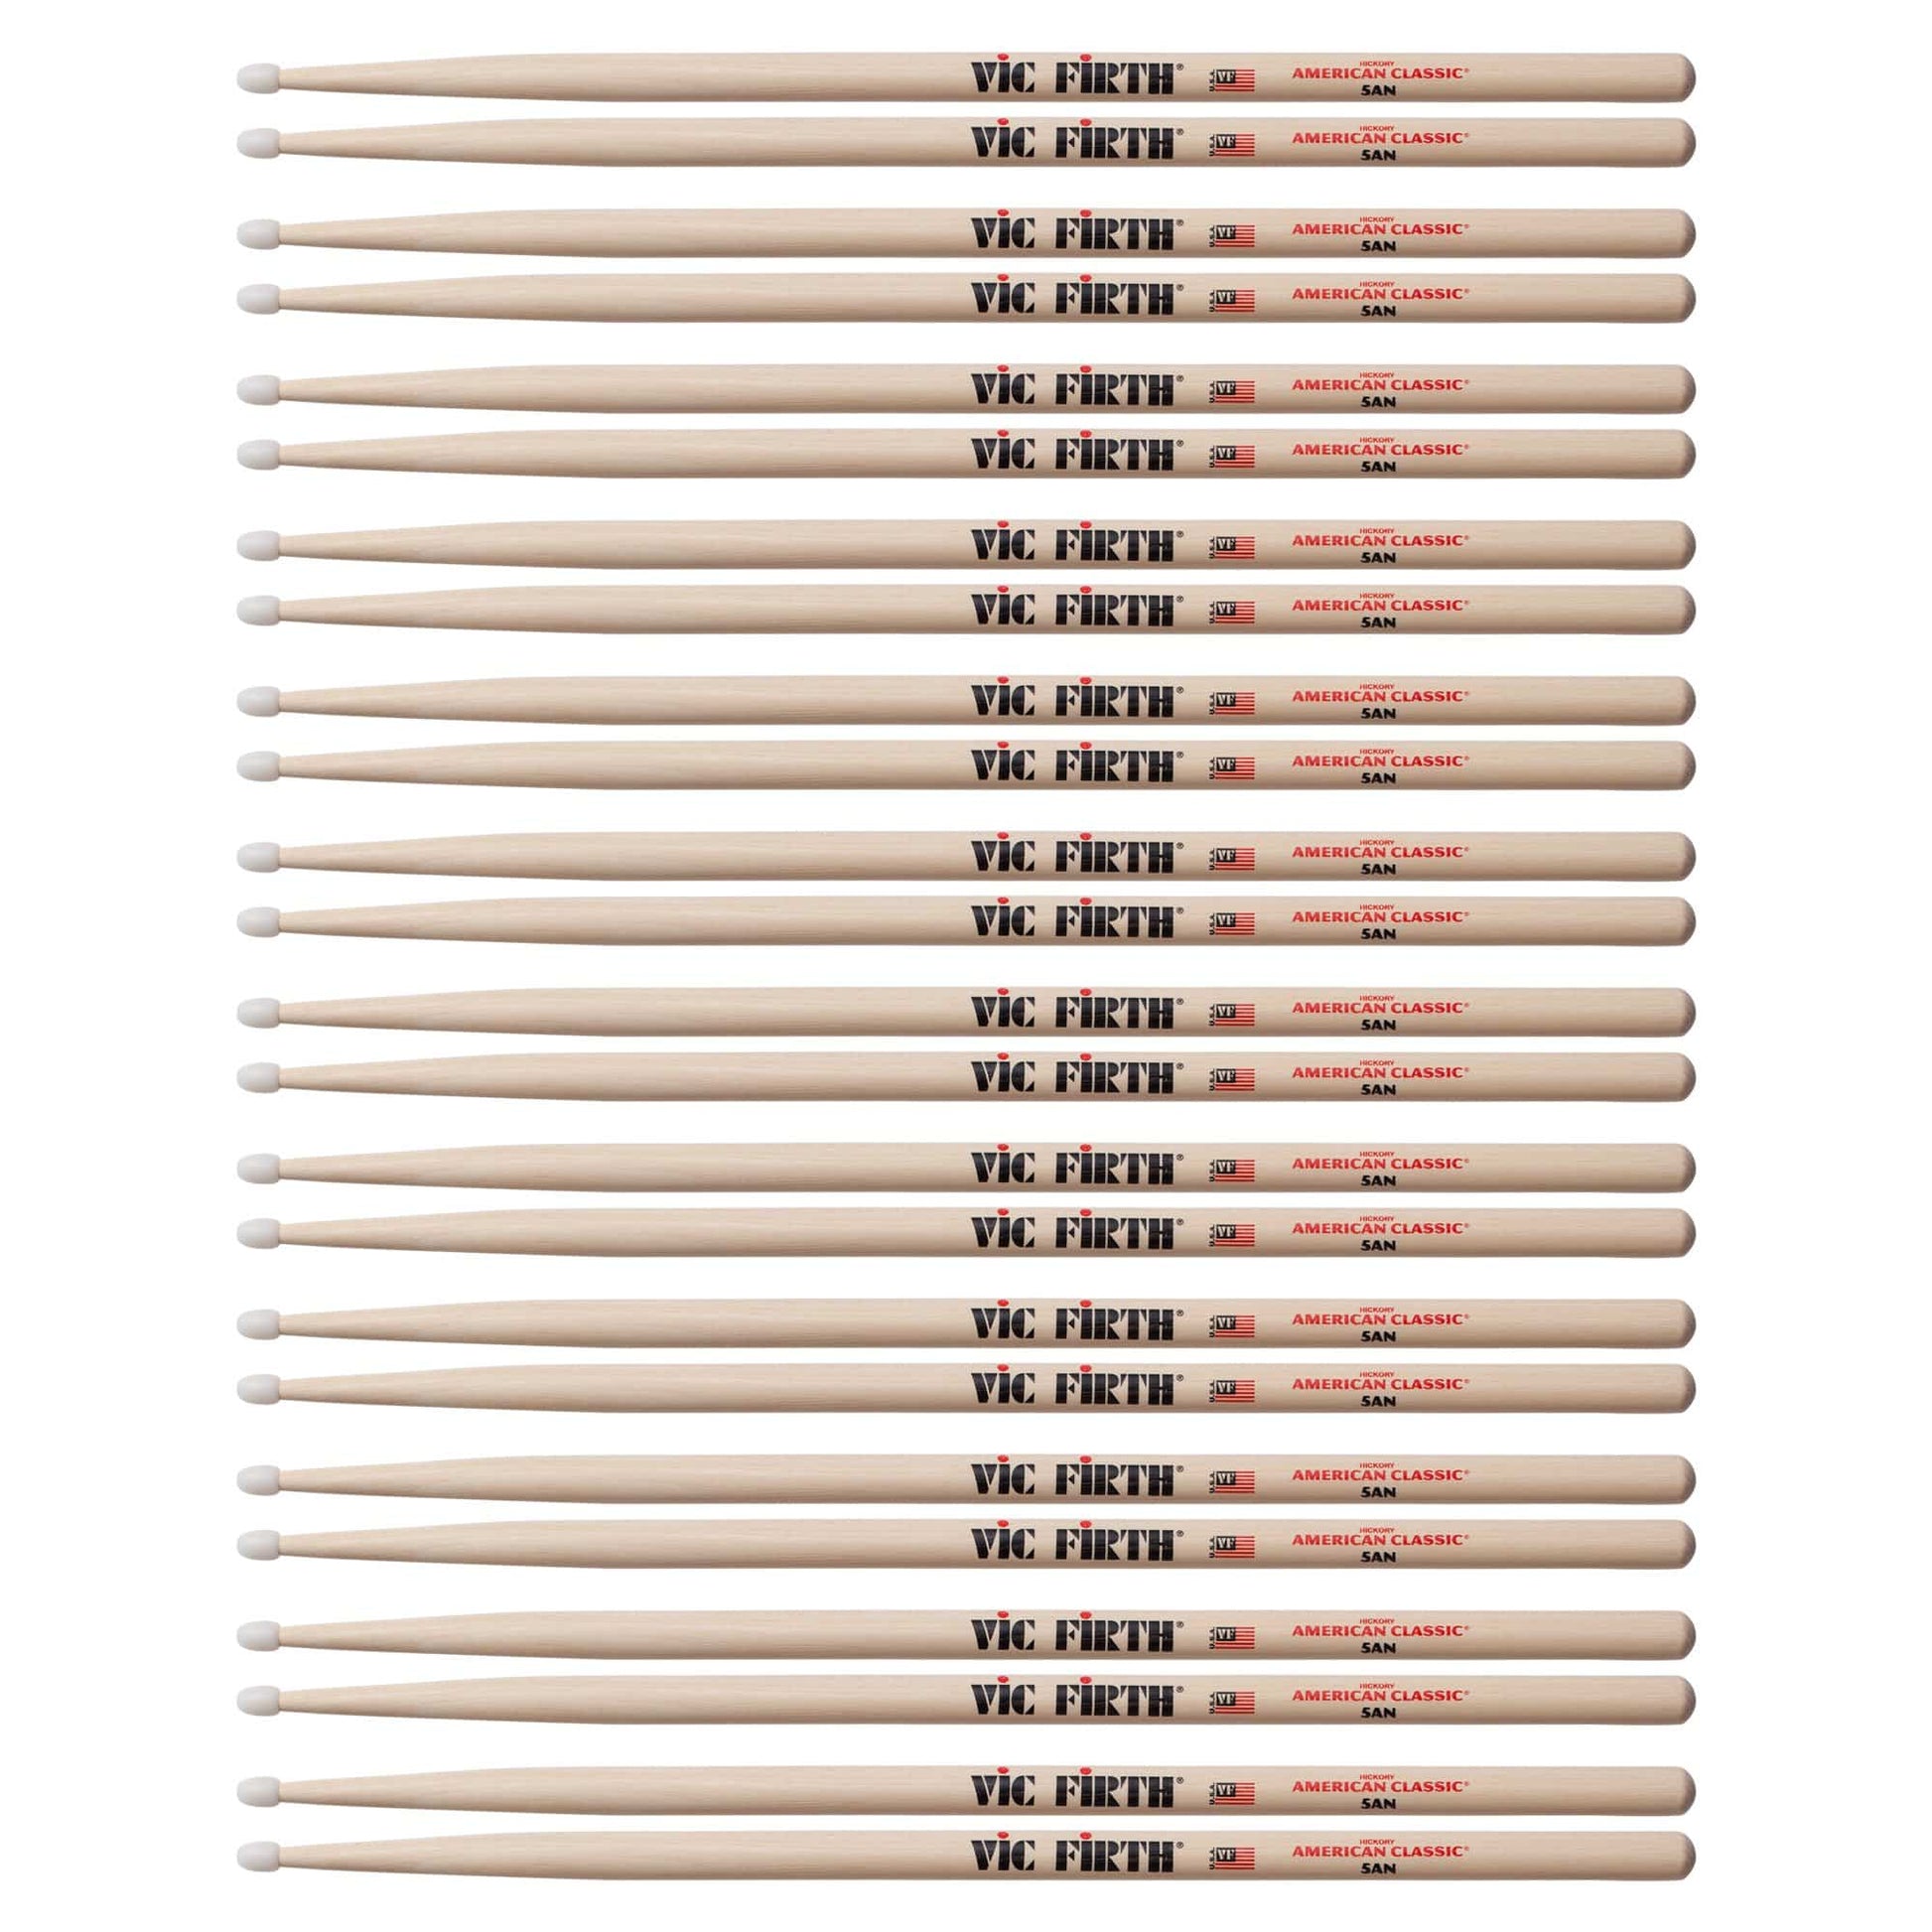 Vic Firth American Classic 5A Nylon Tip Drum Sticks (12 Pair Bundle) Drums and Percussion / Parts and Accessories / Drum Sticks and Mallets